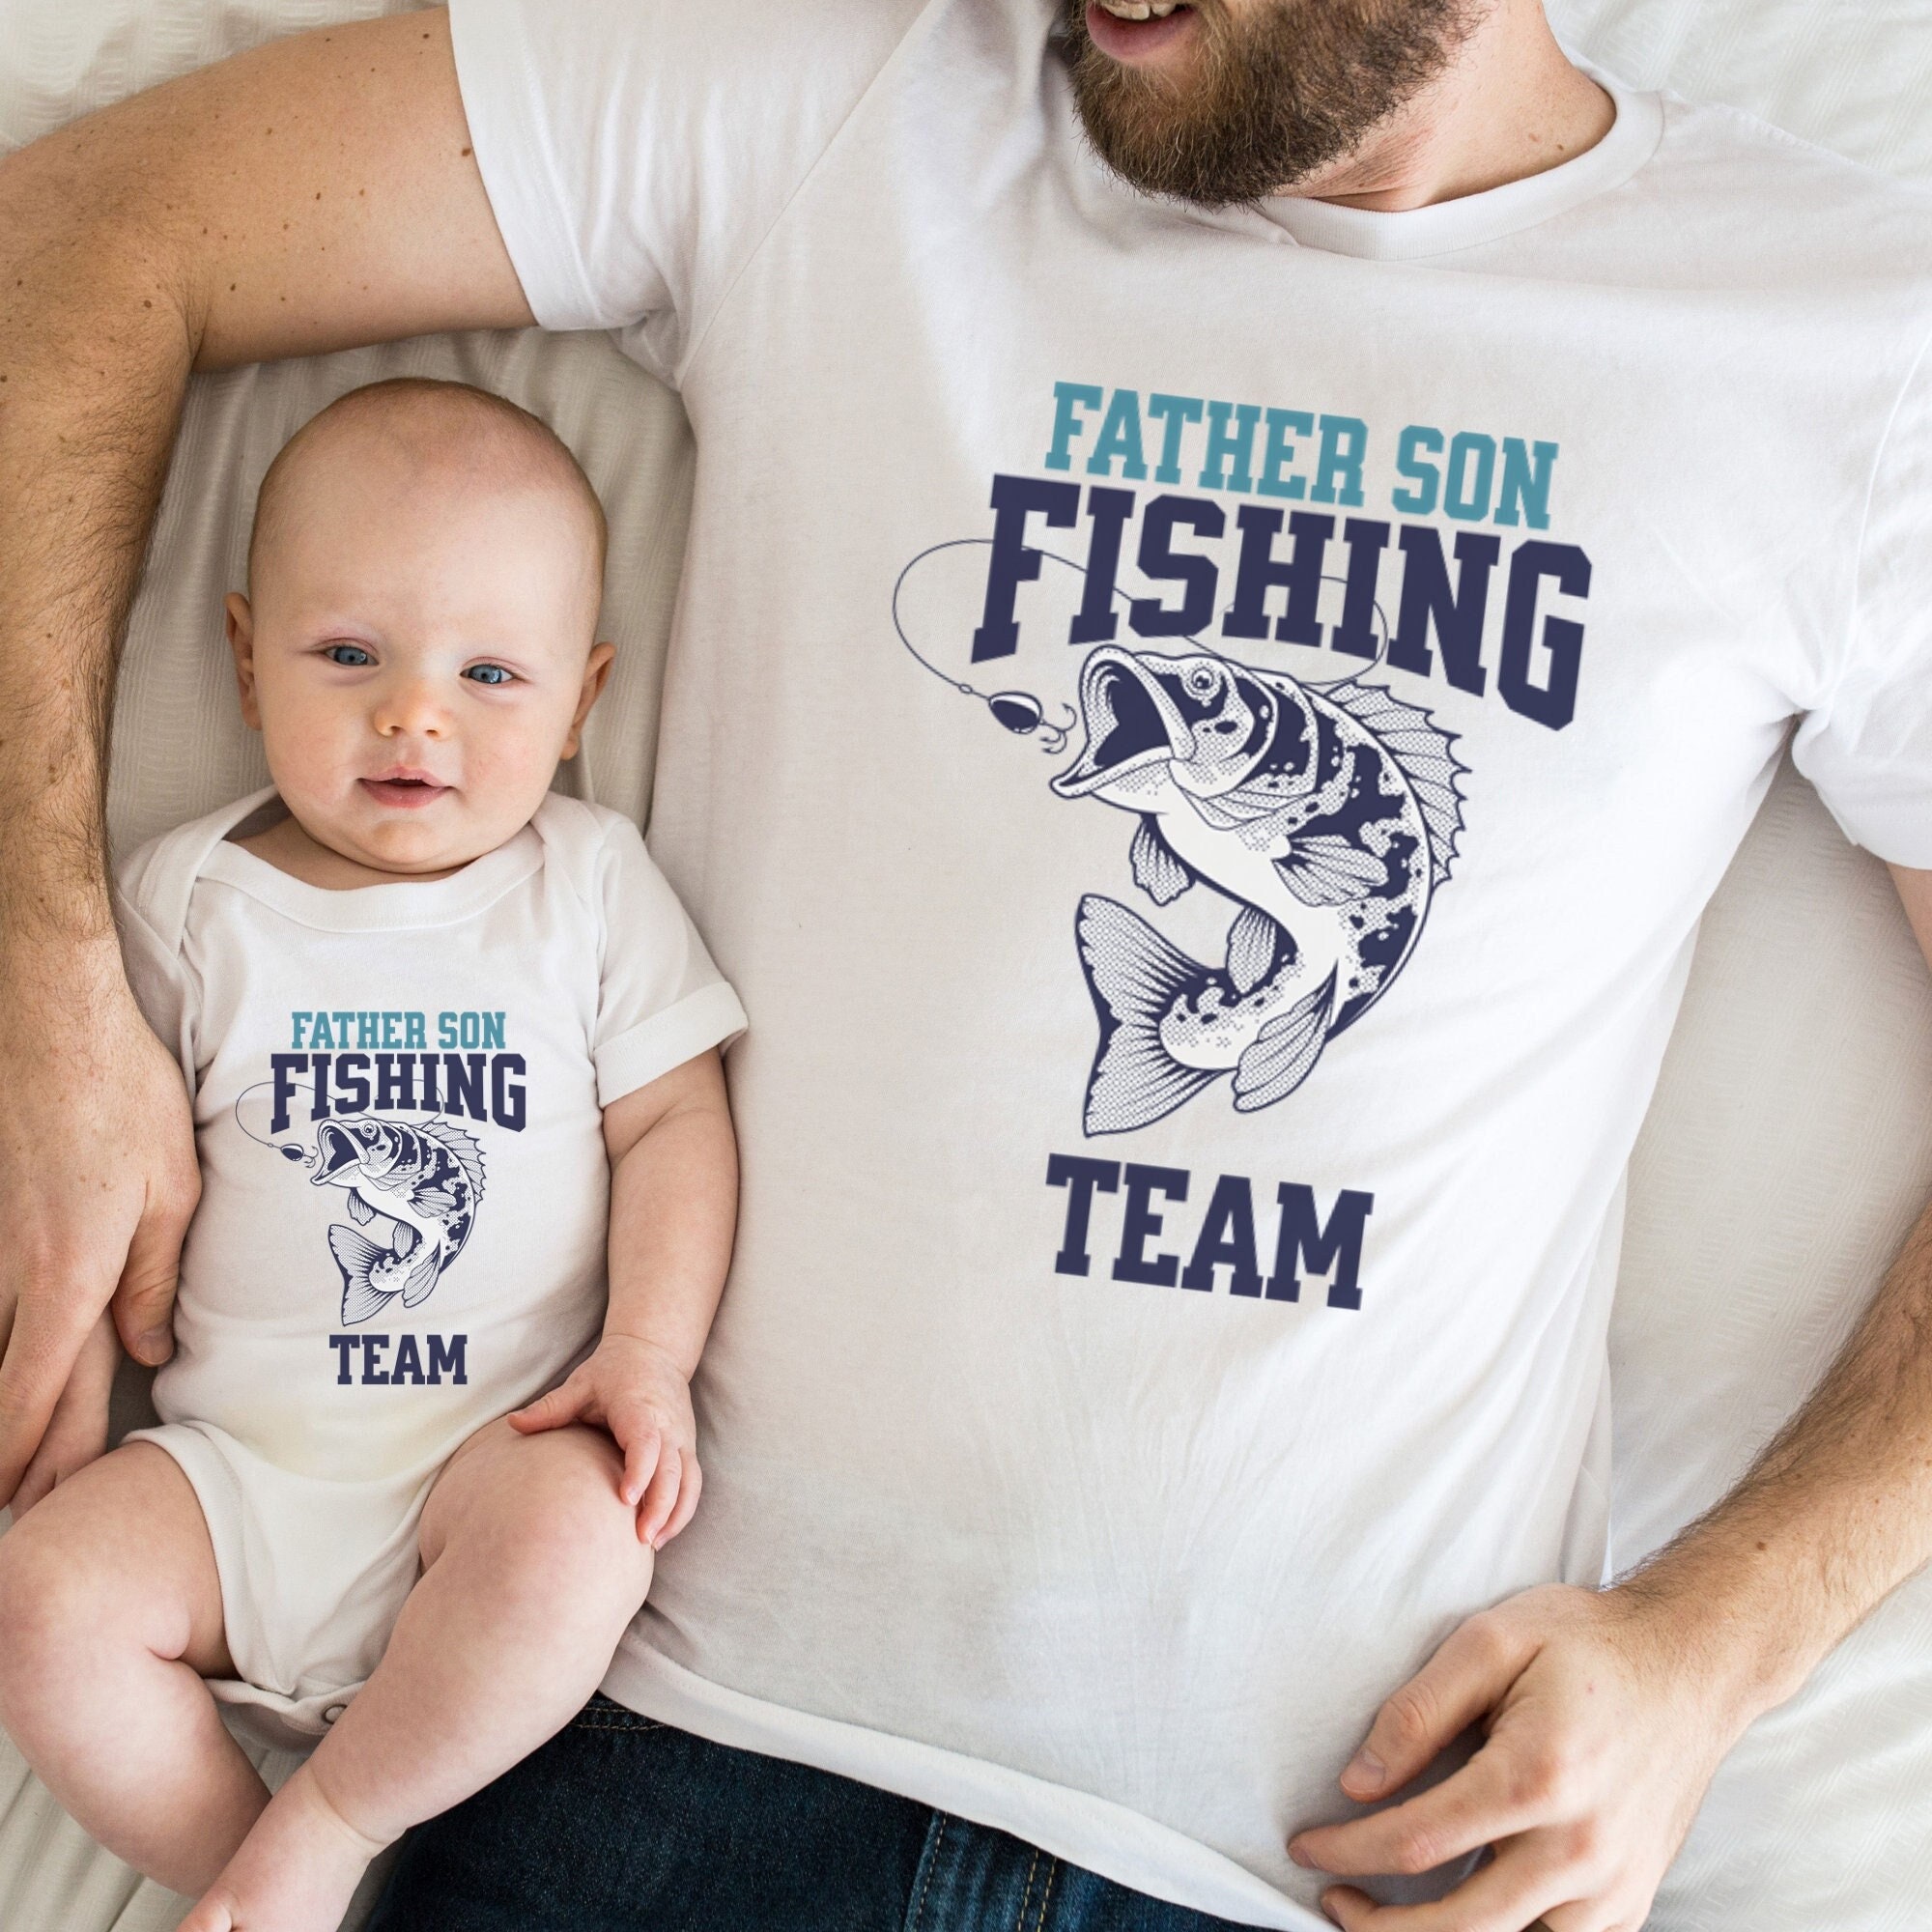 Father Son Fishing Shirts Matching Father and Son Fishing, Father Son Fishing T, Father and Son Fishing Tshirt, . Father's Day, Fathers Days